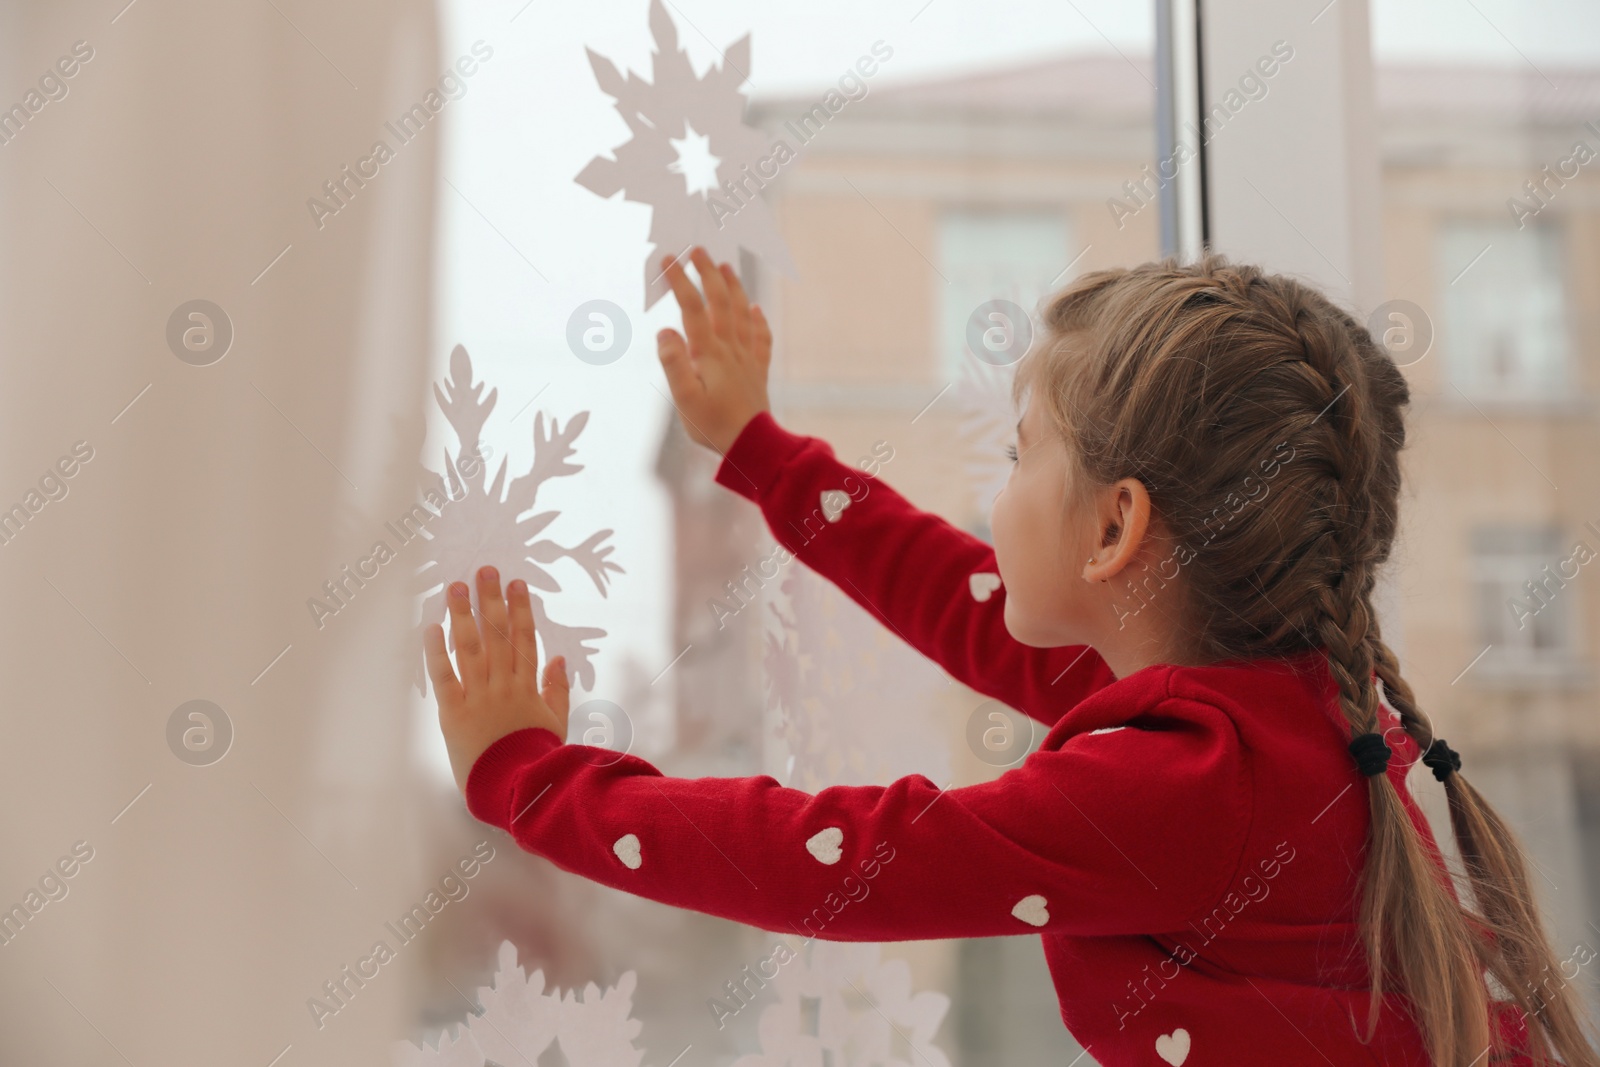 Photo of Cute little girl decorating window with paper snowflake indoors